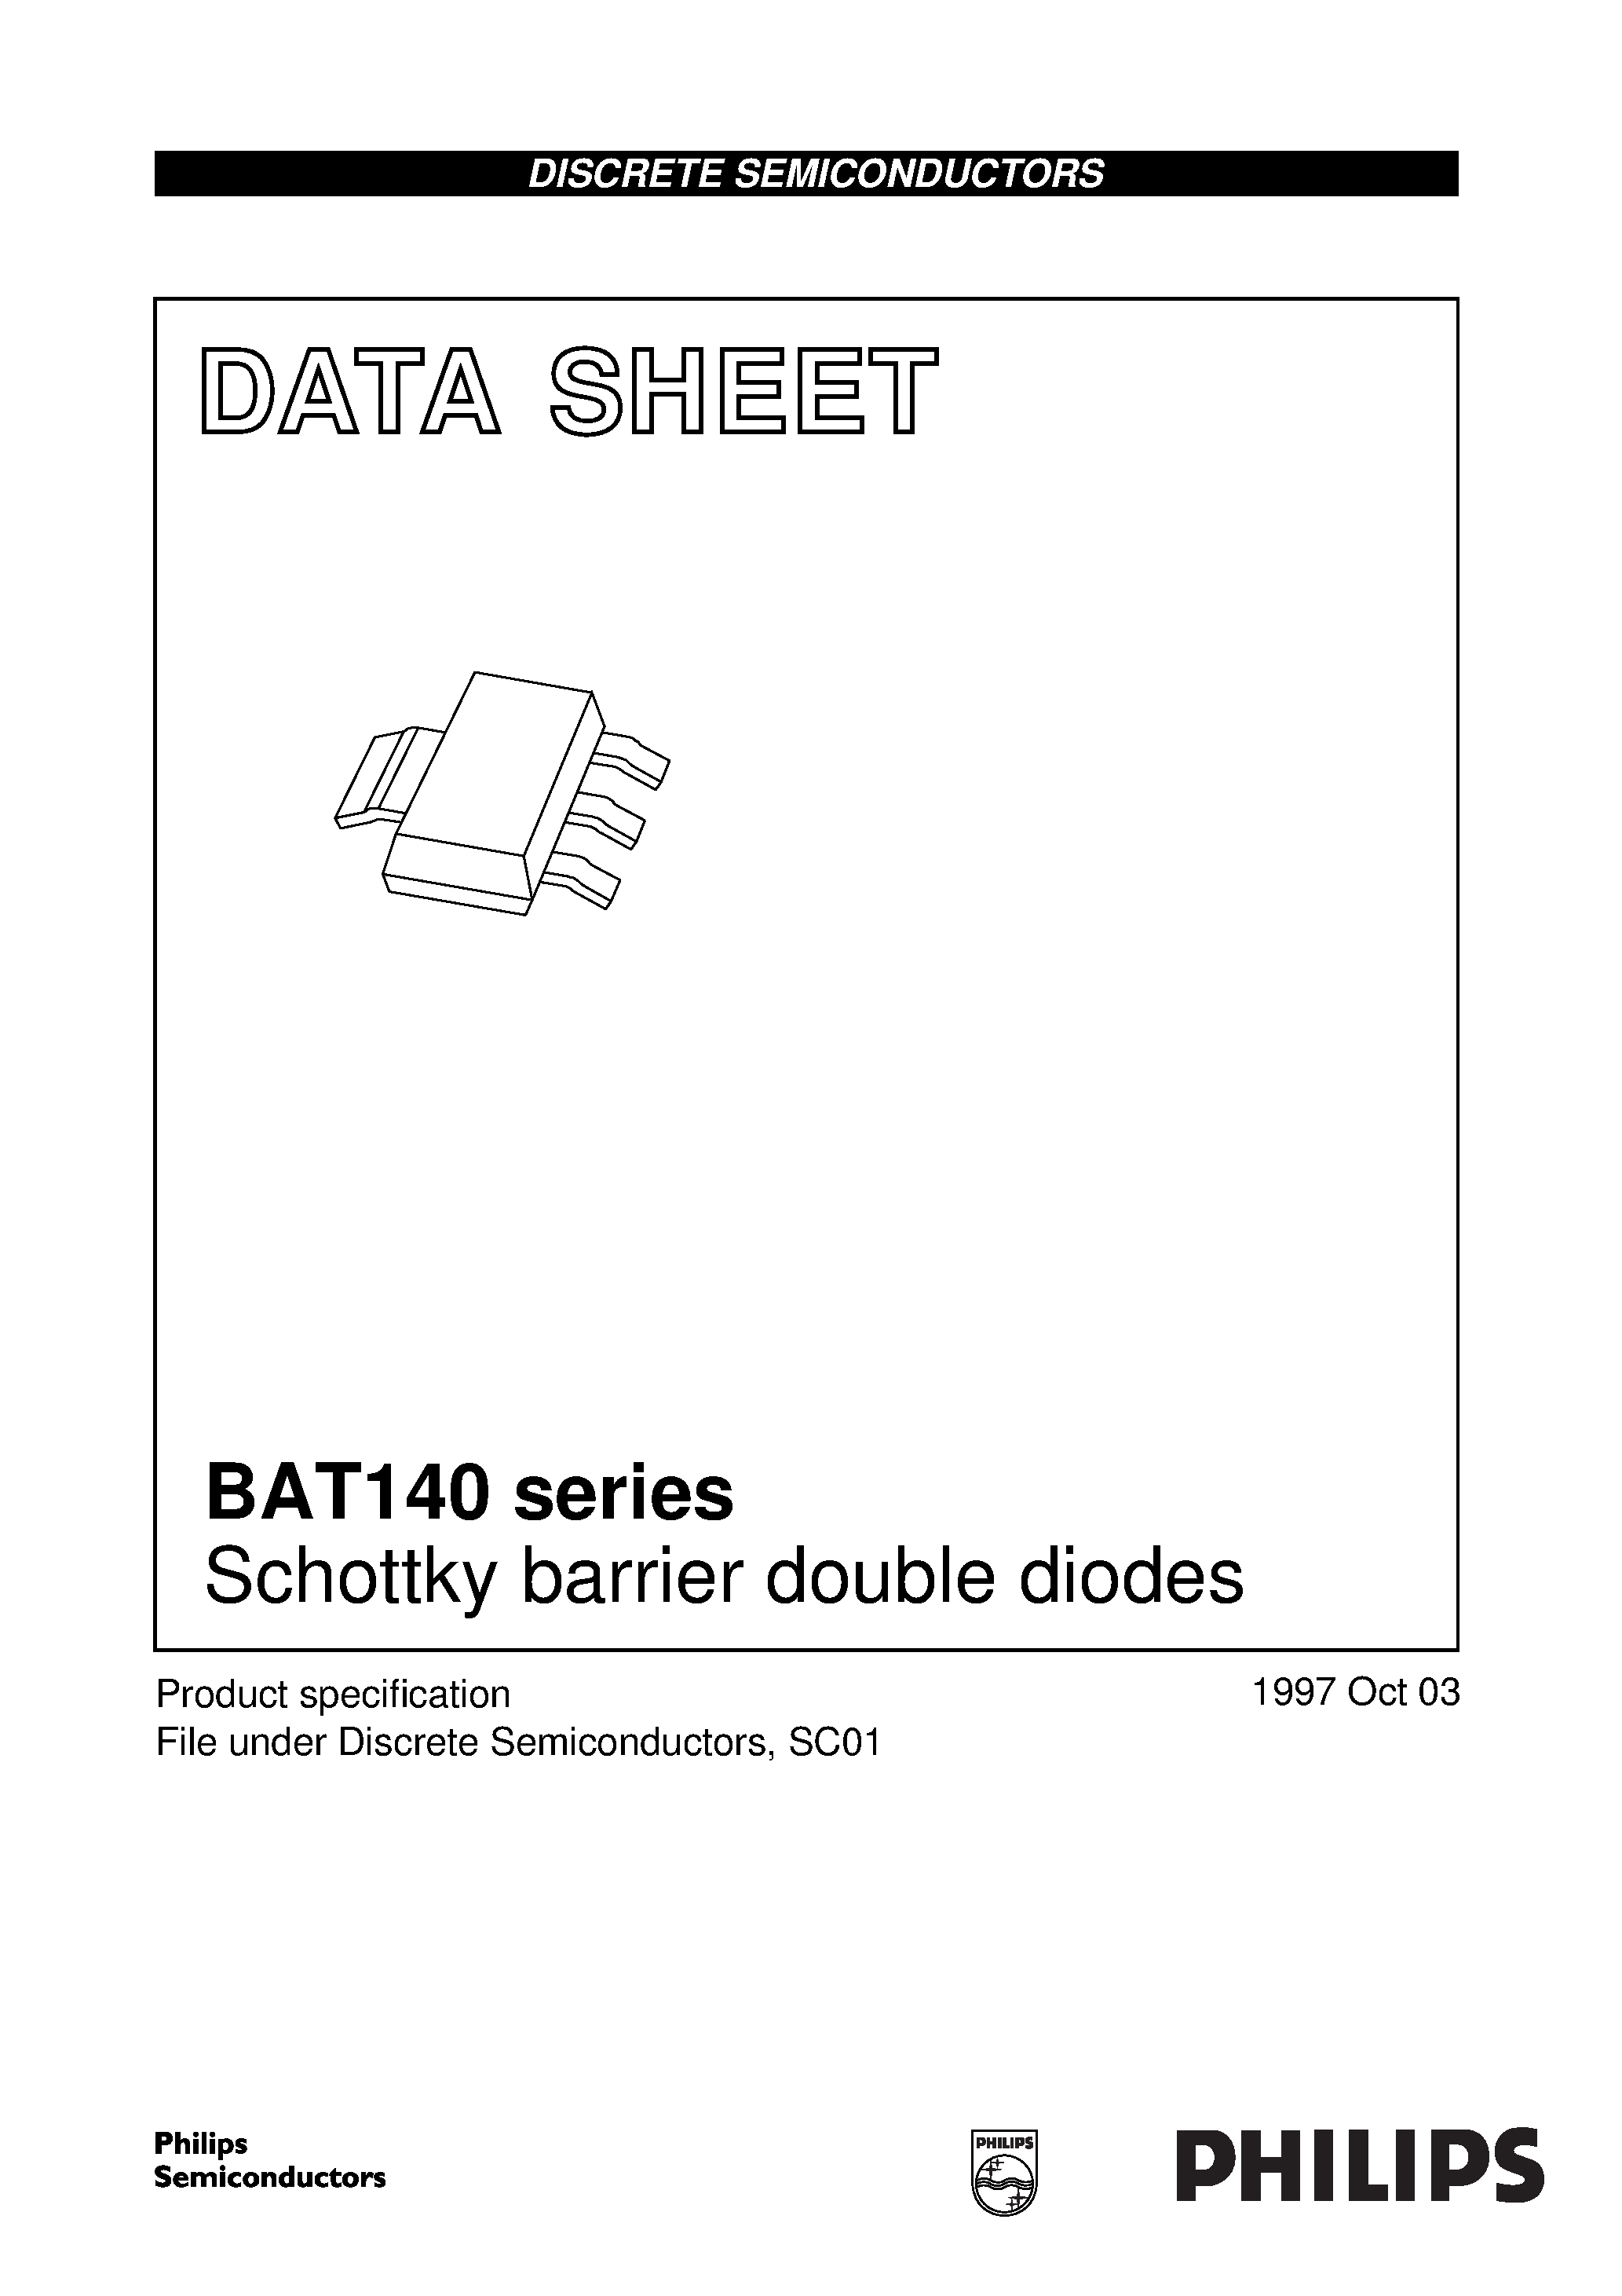 Datasheet BAT140A - Schottky barrier double diodes page 1